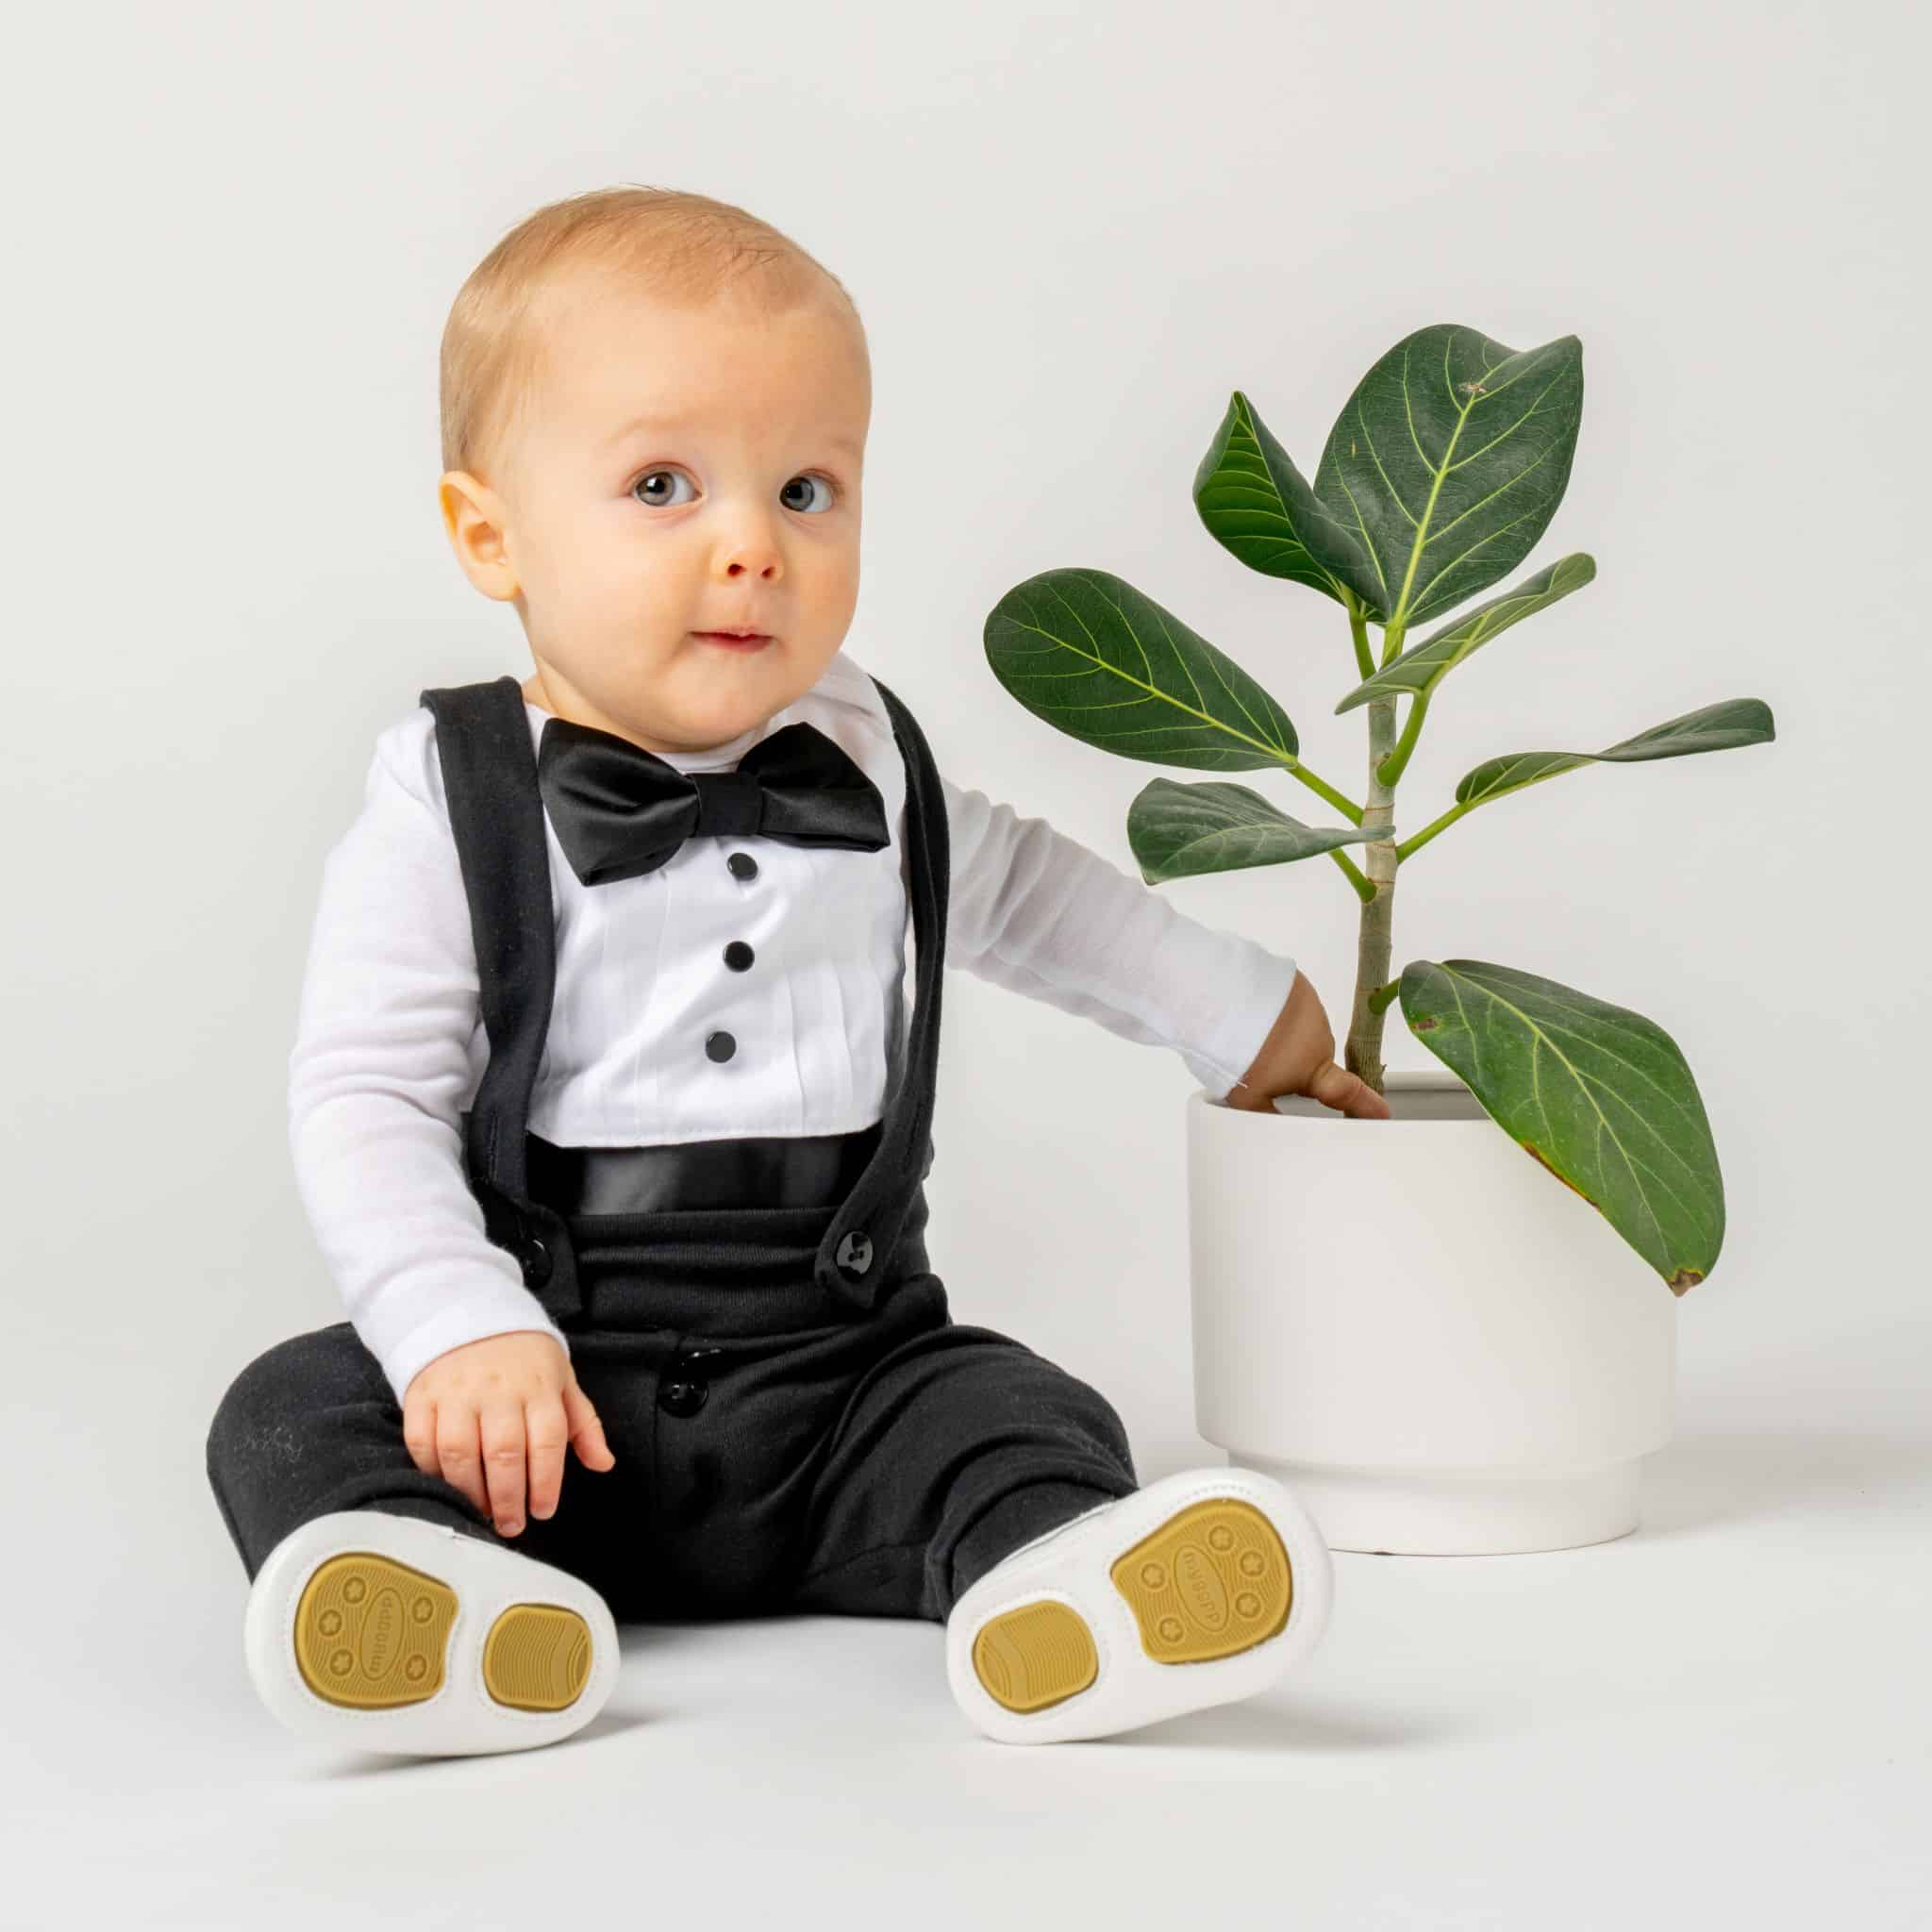 Handmade Baby Tuxedo | 0 to 24 months | Bebe Couture